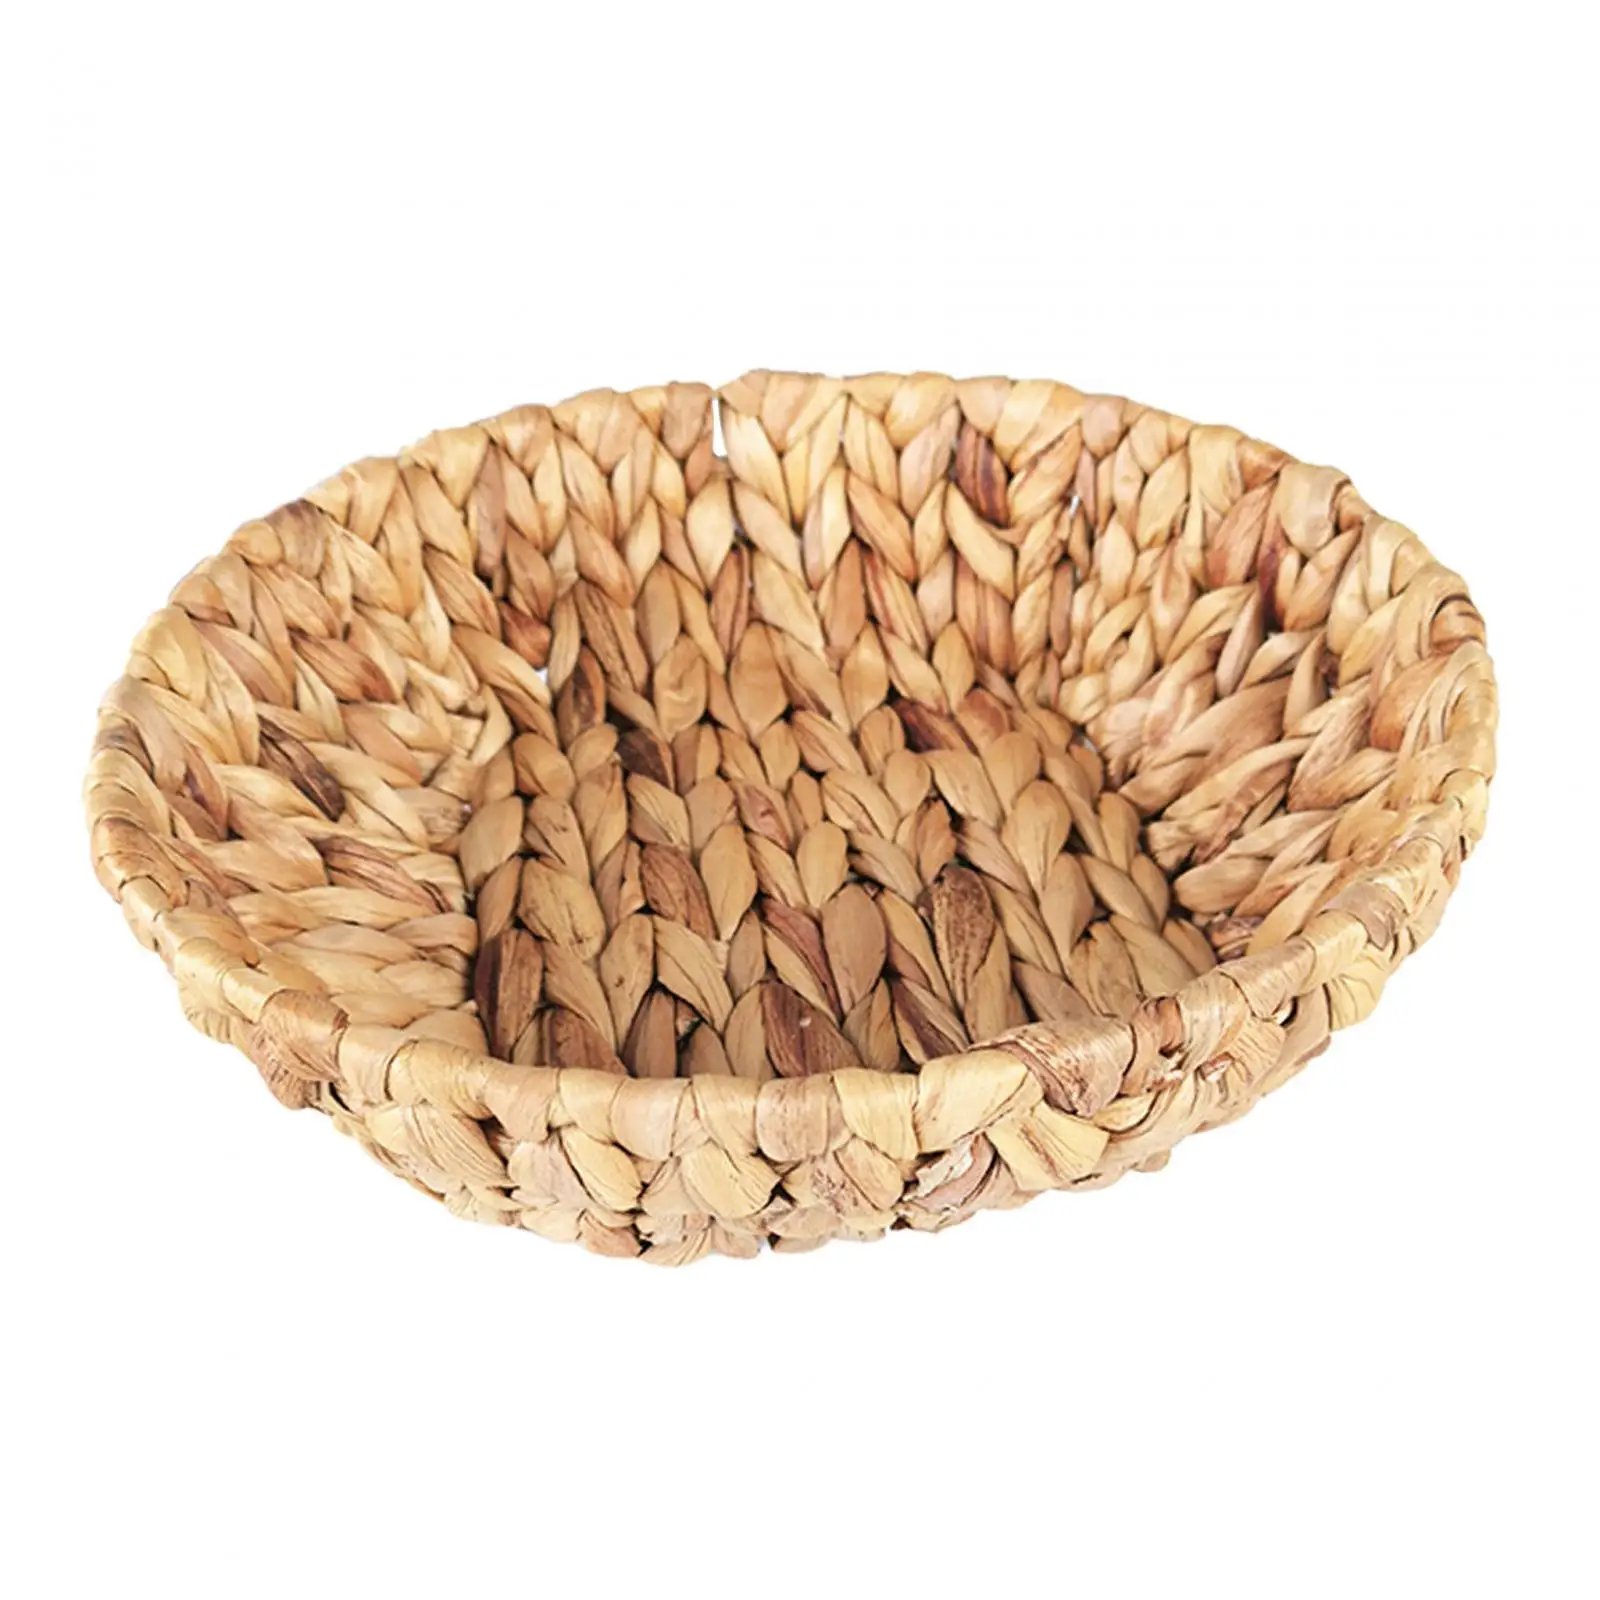 Water Hyacinth Storage Basket Home Decorative Wicker Serving Tray for Tea Party